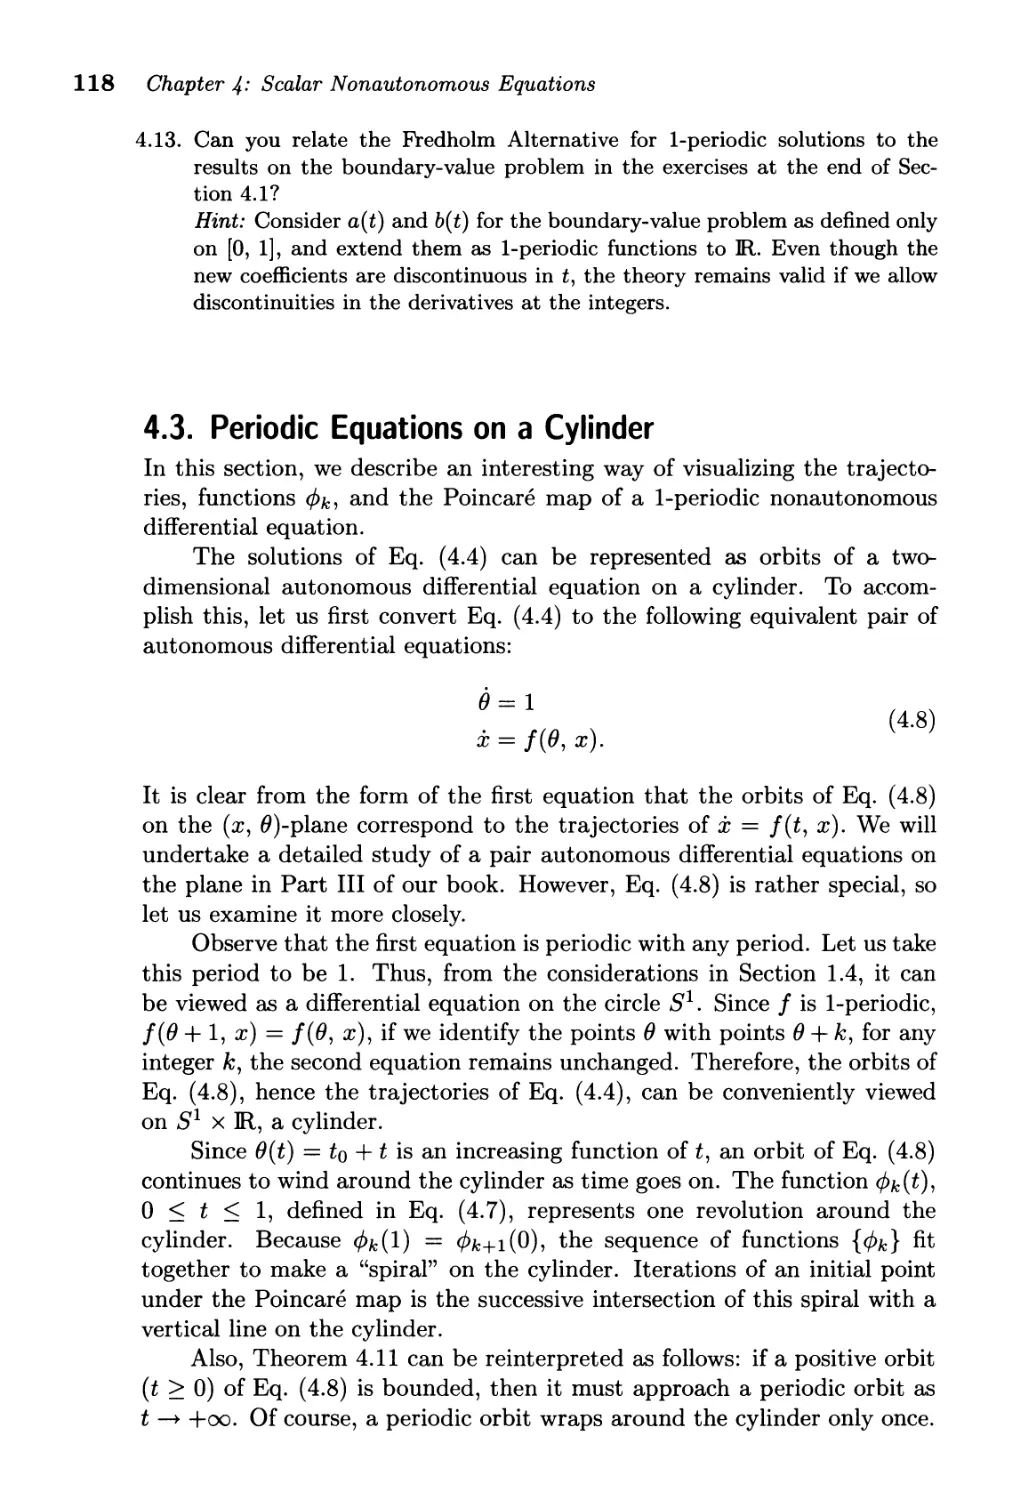 4.3. Periodic Equations on a Cylinder